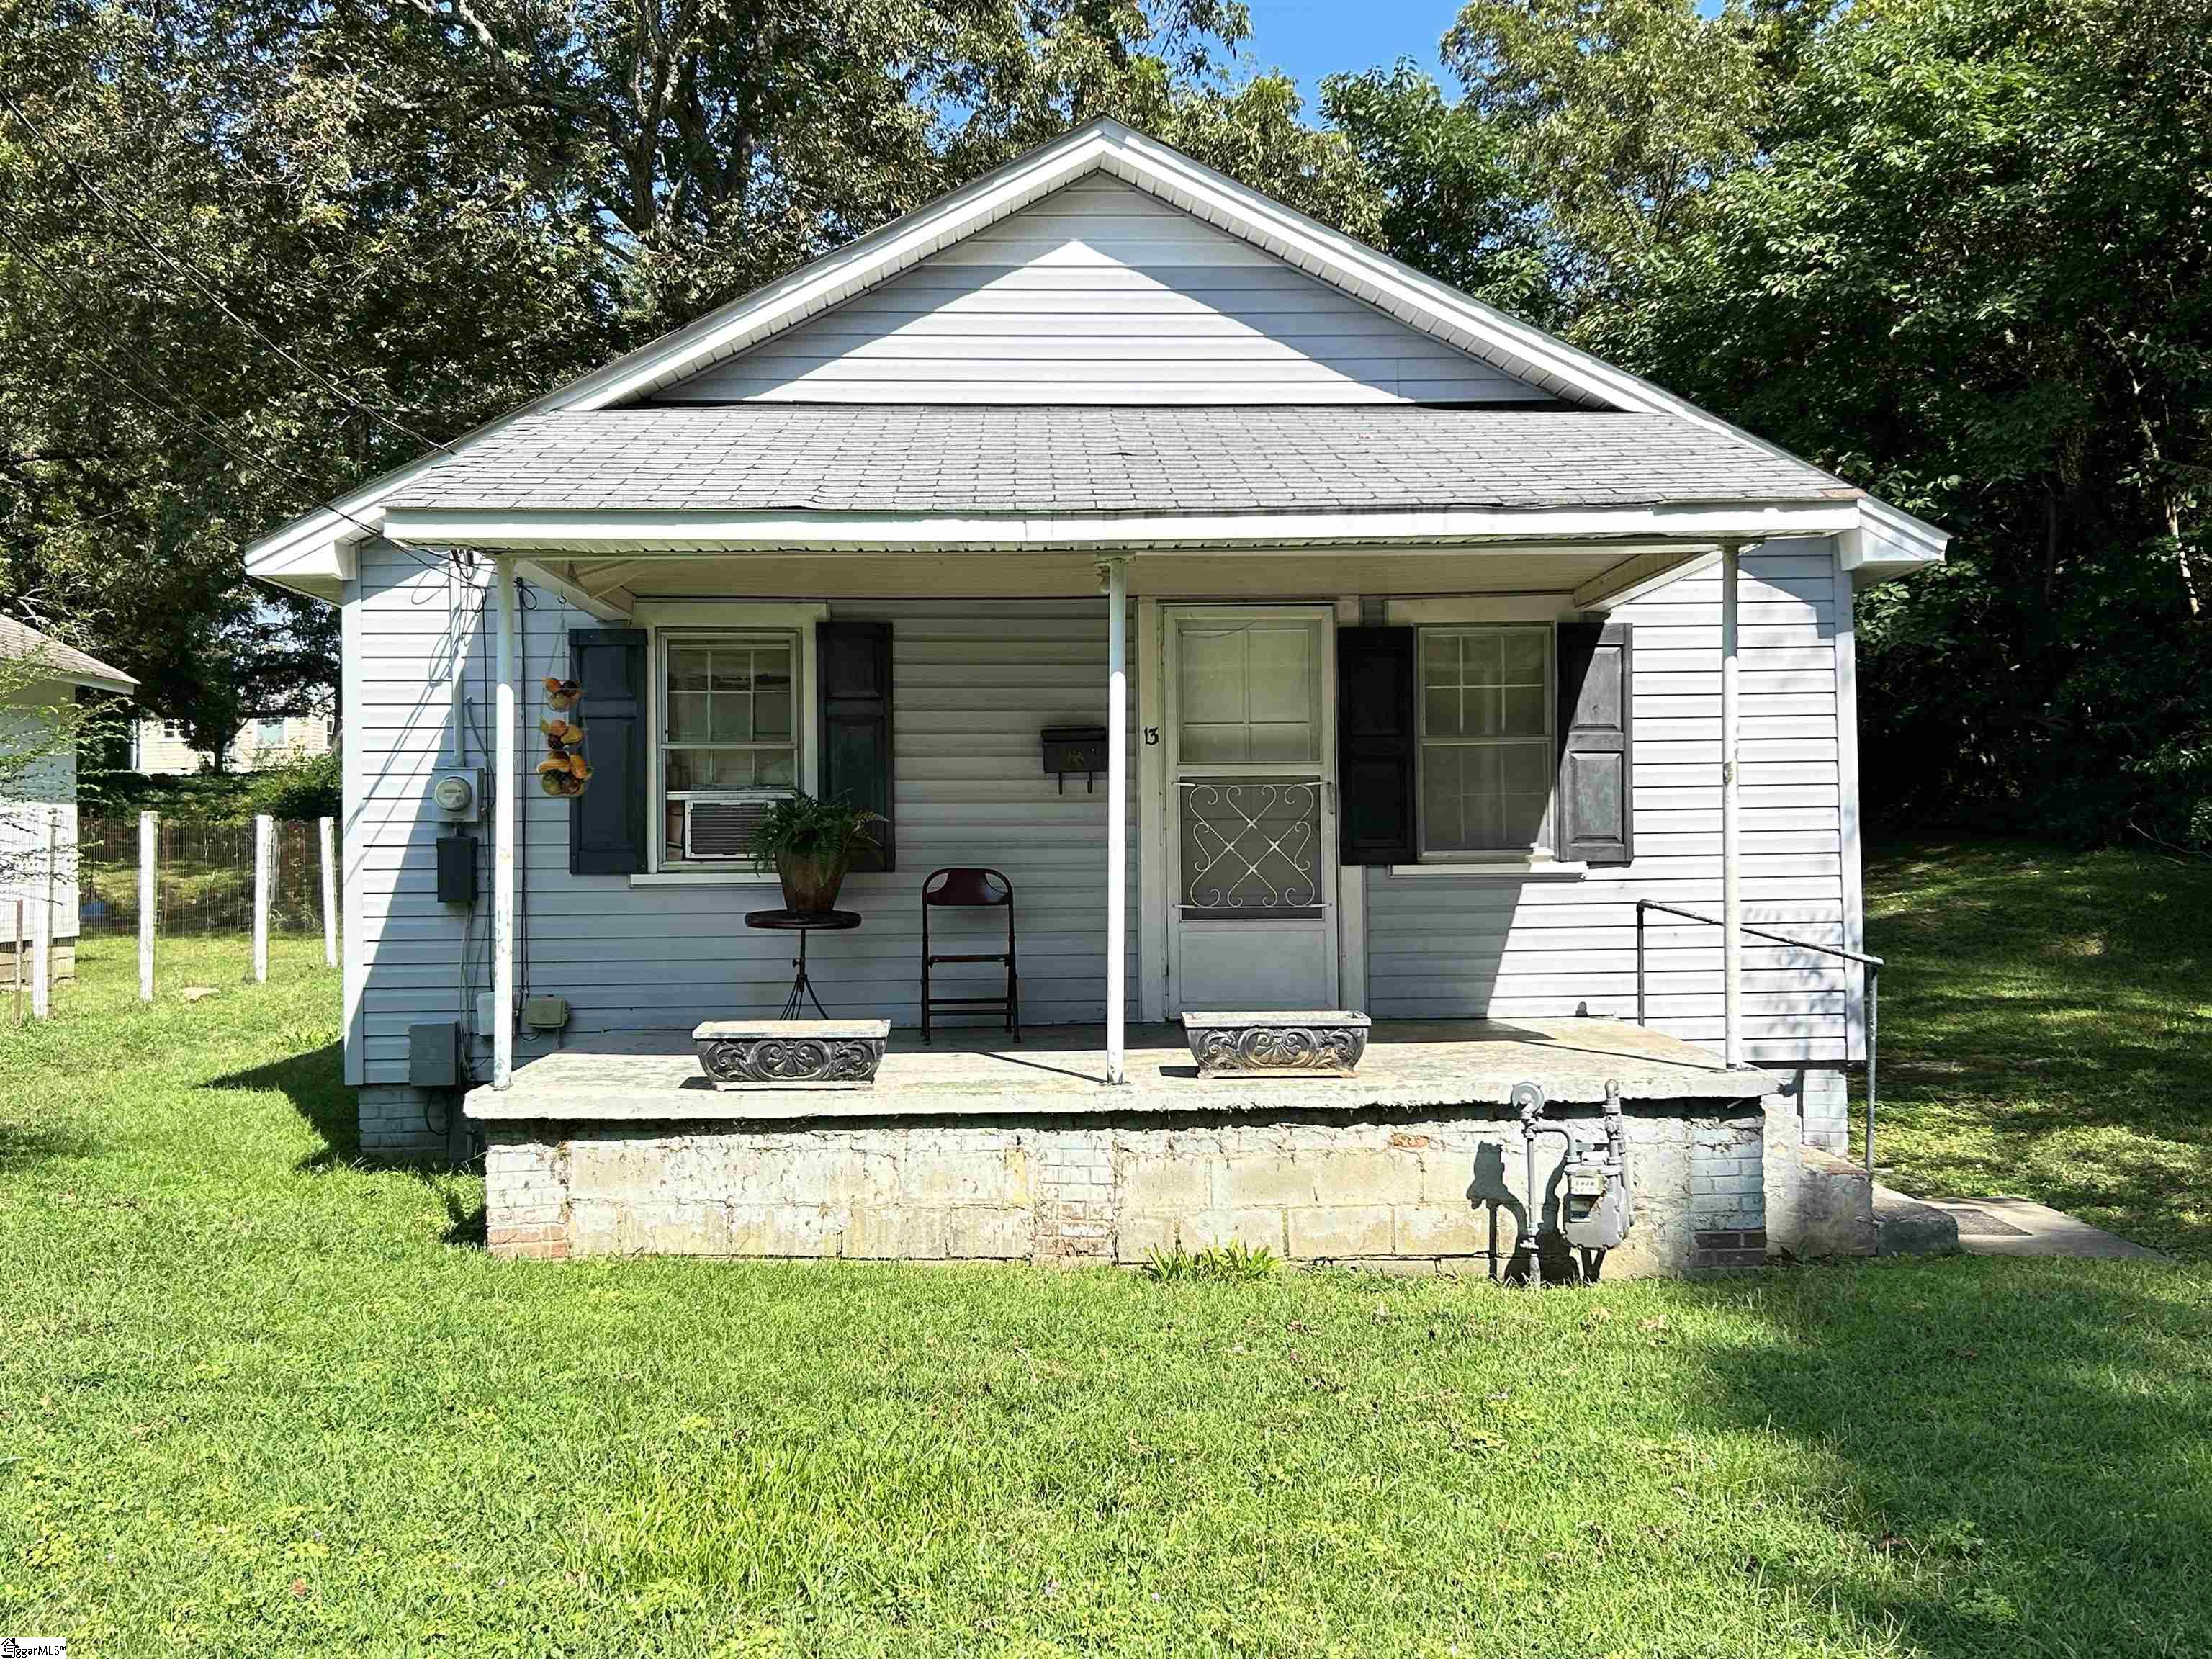 We have received multiple offers on 13 Market St. in Williamston! We are calling for all offers by tomorrow September 22, 2023 at 12:00PM. We should have answers by September 22, 2023 at 5PM. This is an investor's special! Come see this 2 bedroom home located in Williamston! Home is for sale as is!